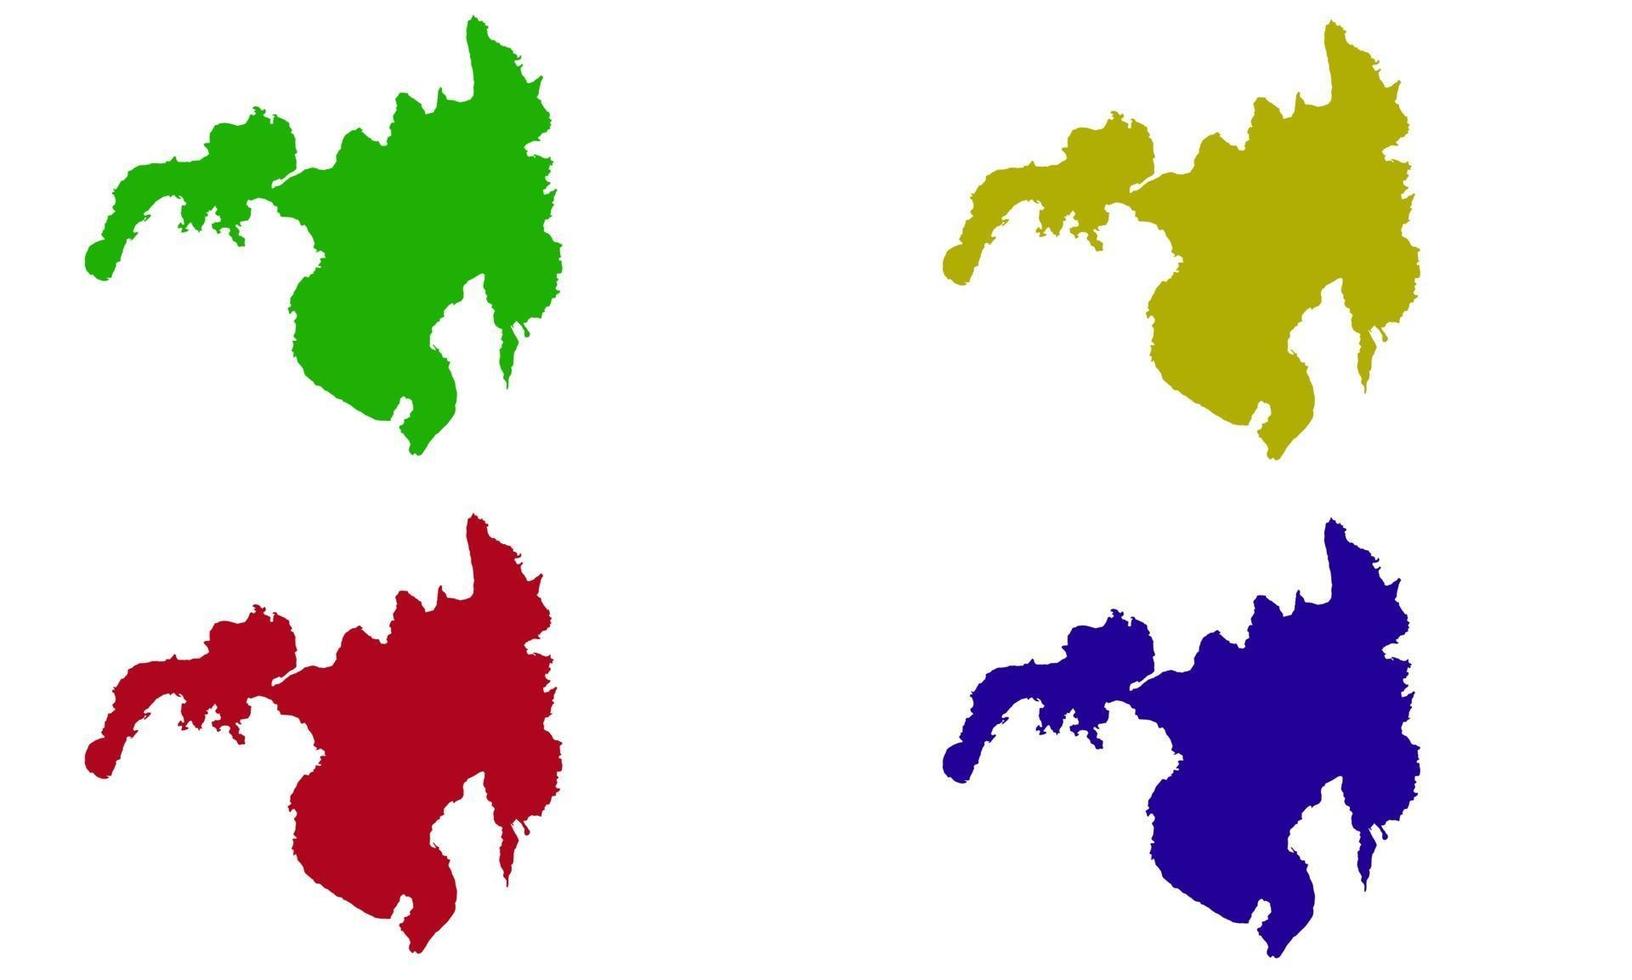 Mindanao island map silhouette in the Philippines vector